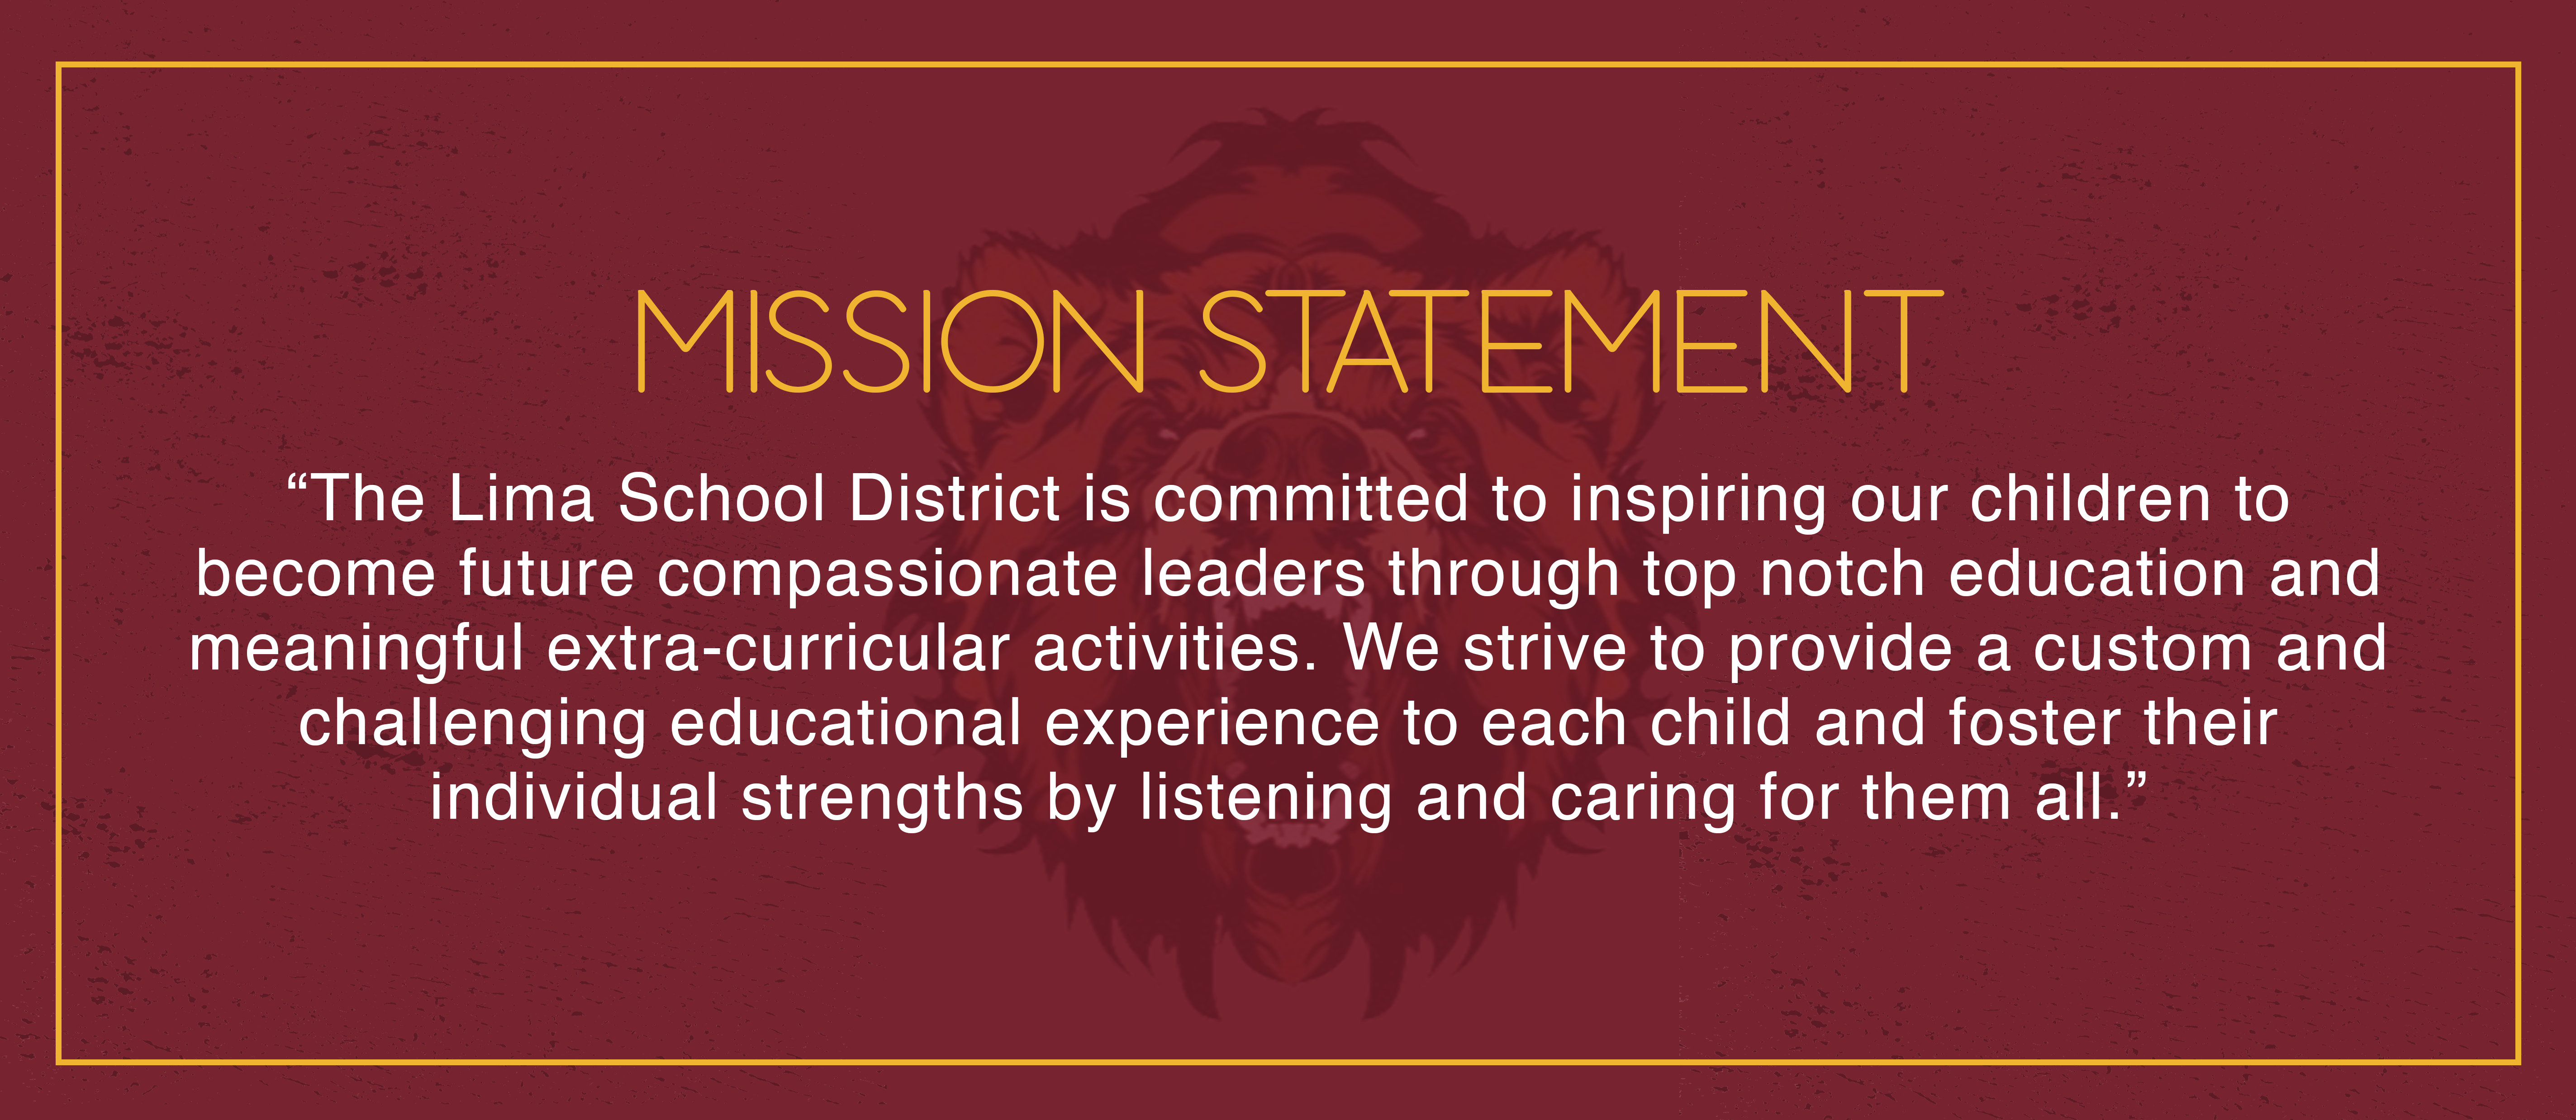 MISSION STATEMENT "The Lima School District is committed to inspiring our children to become future compassionate leaders through top notch education and meaningful extra-curricular activities. We strive to provide a custom and challenging educational experience to each child and foster their individual strengths by listening and caring for them all."